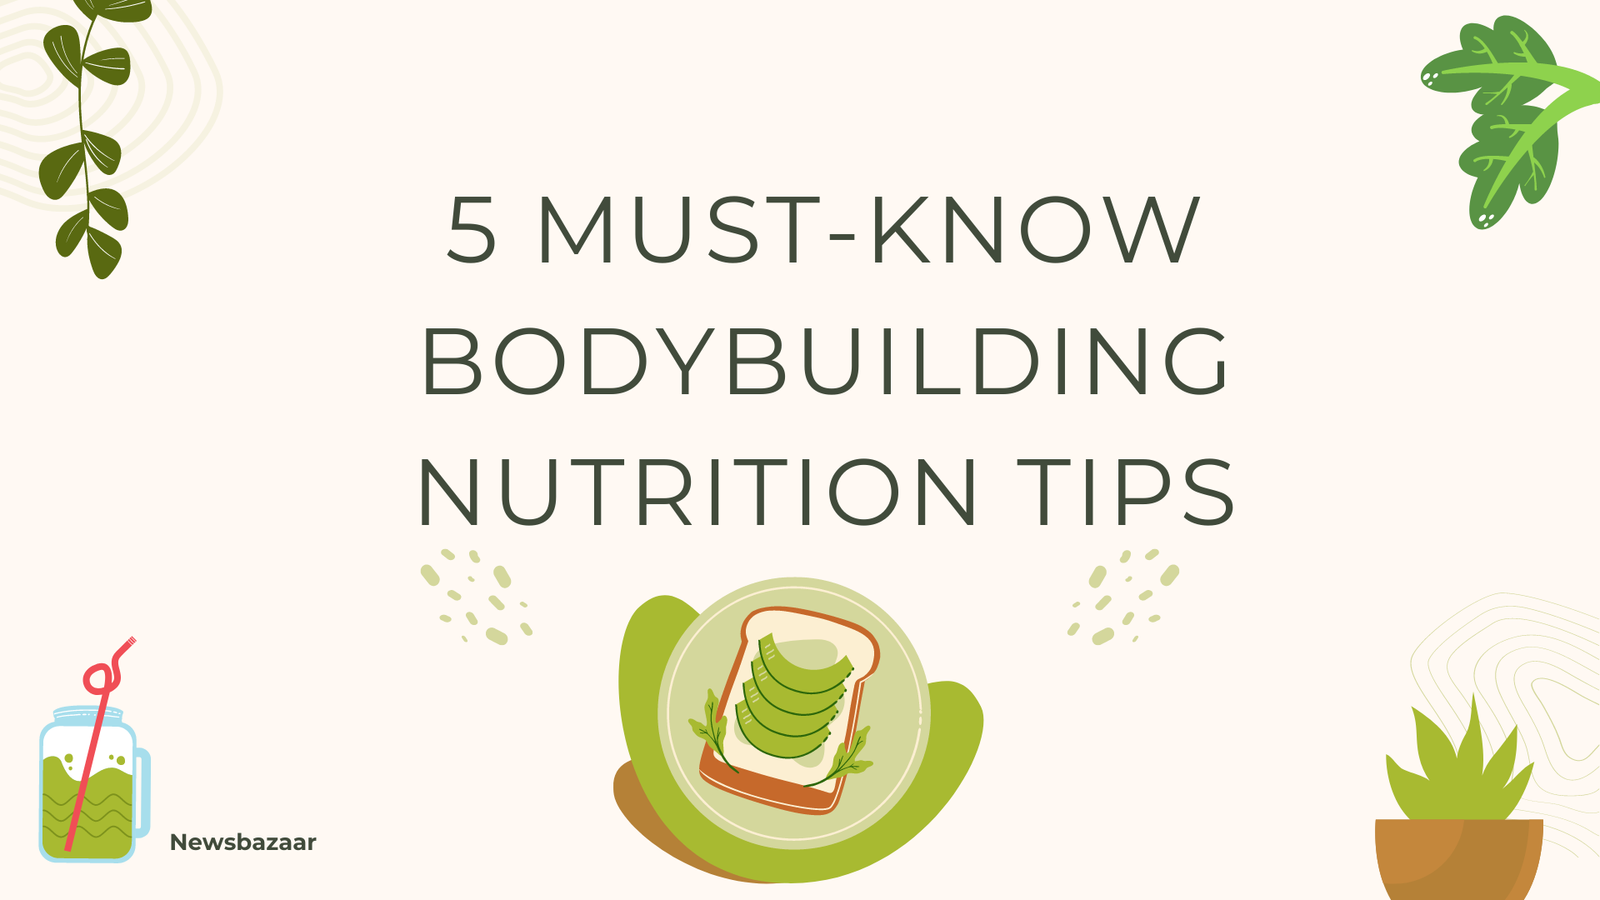 5 Must-Know Bodybuilding Nutrition Tips